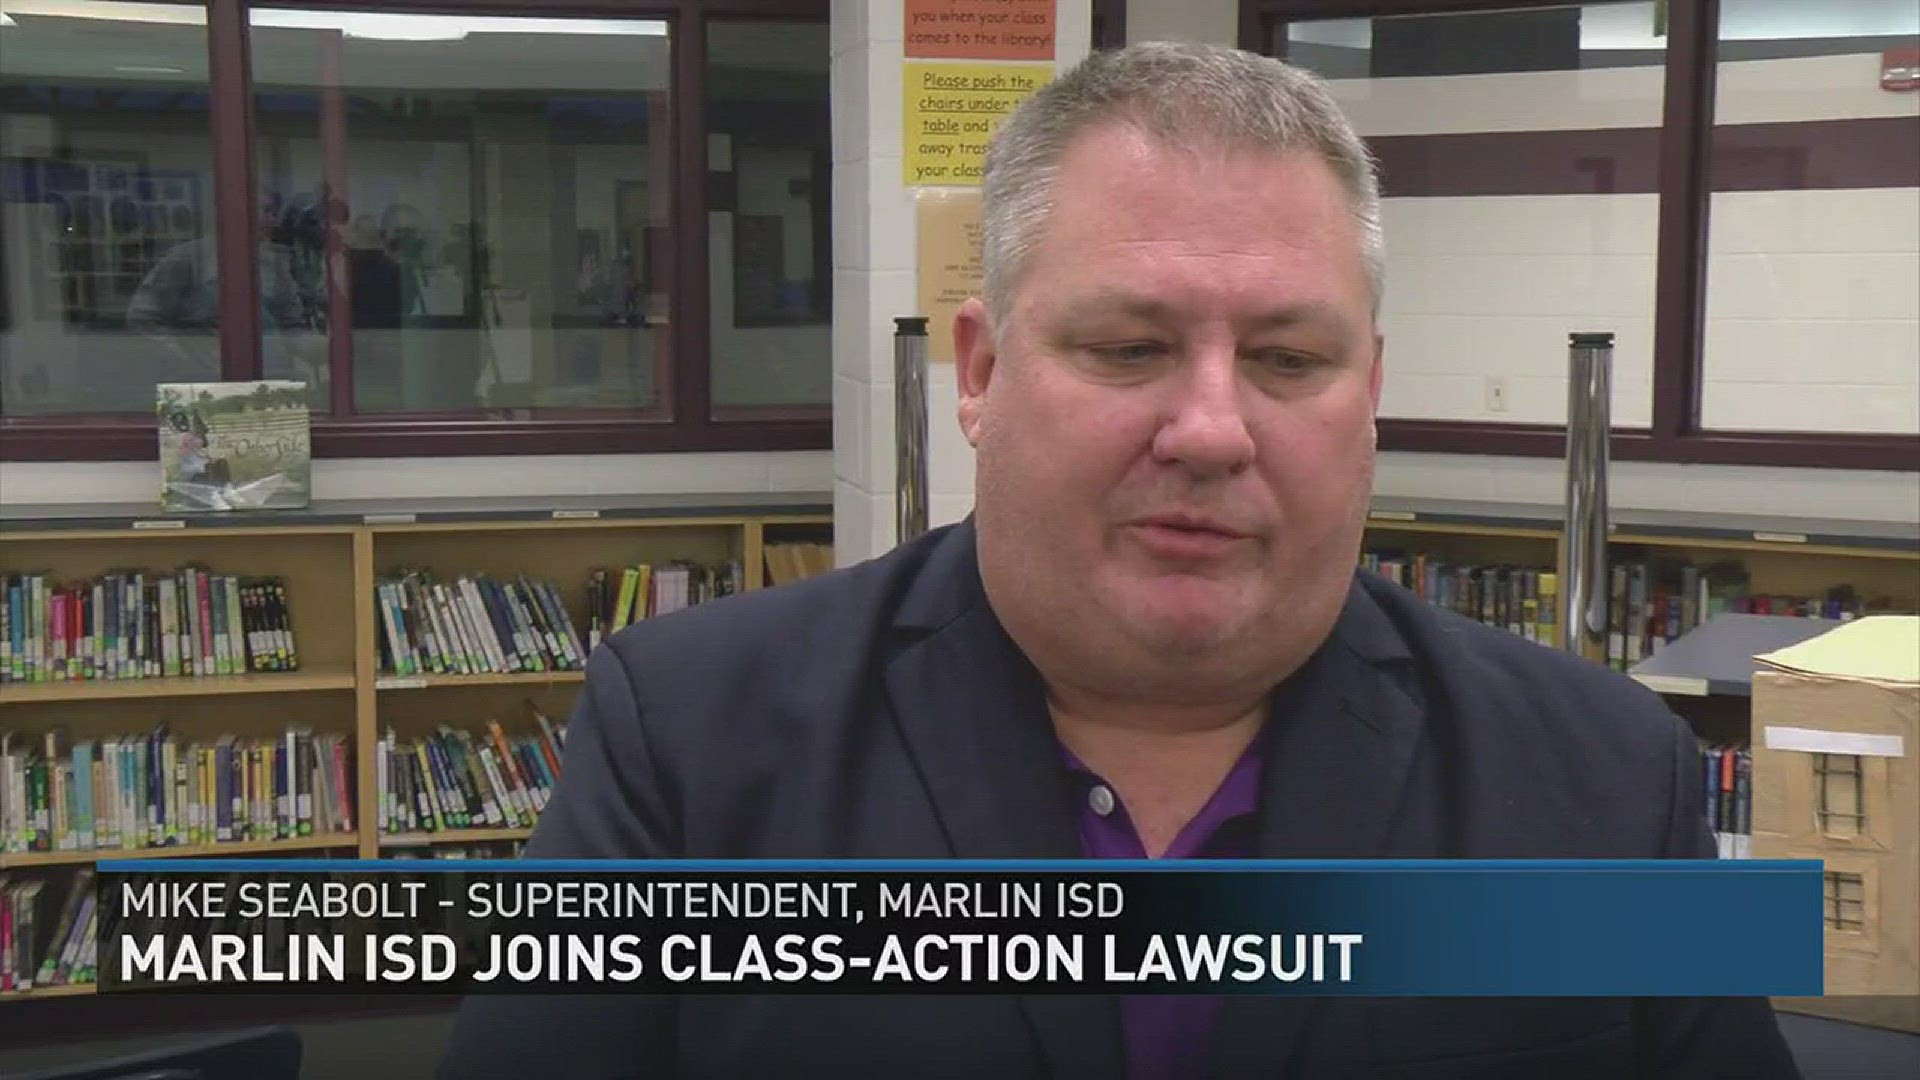 Marlin ISD says it's the first school district in the state to join the class-action lawsuit.